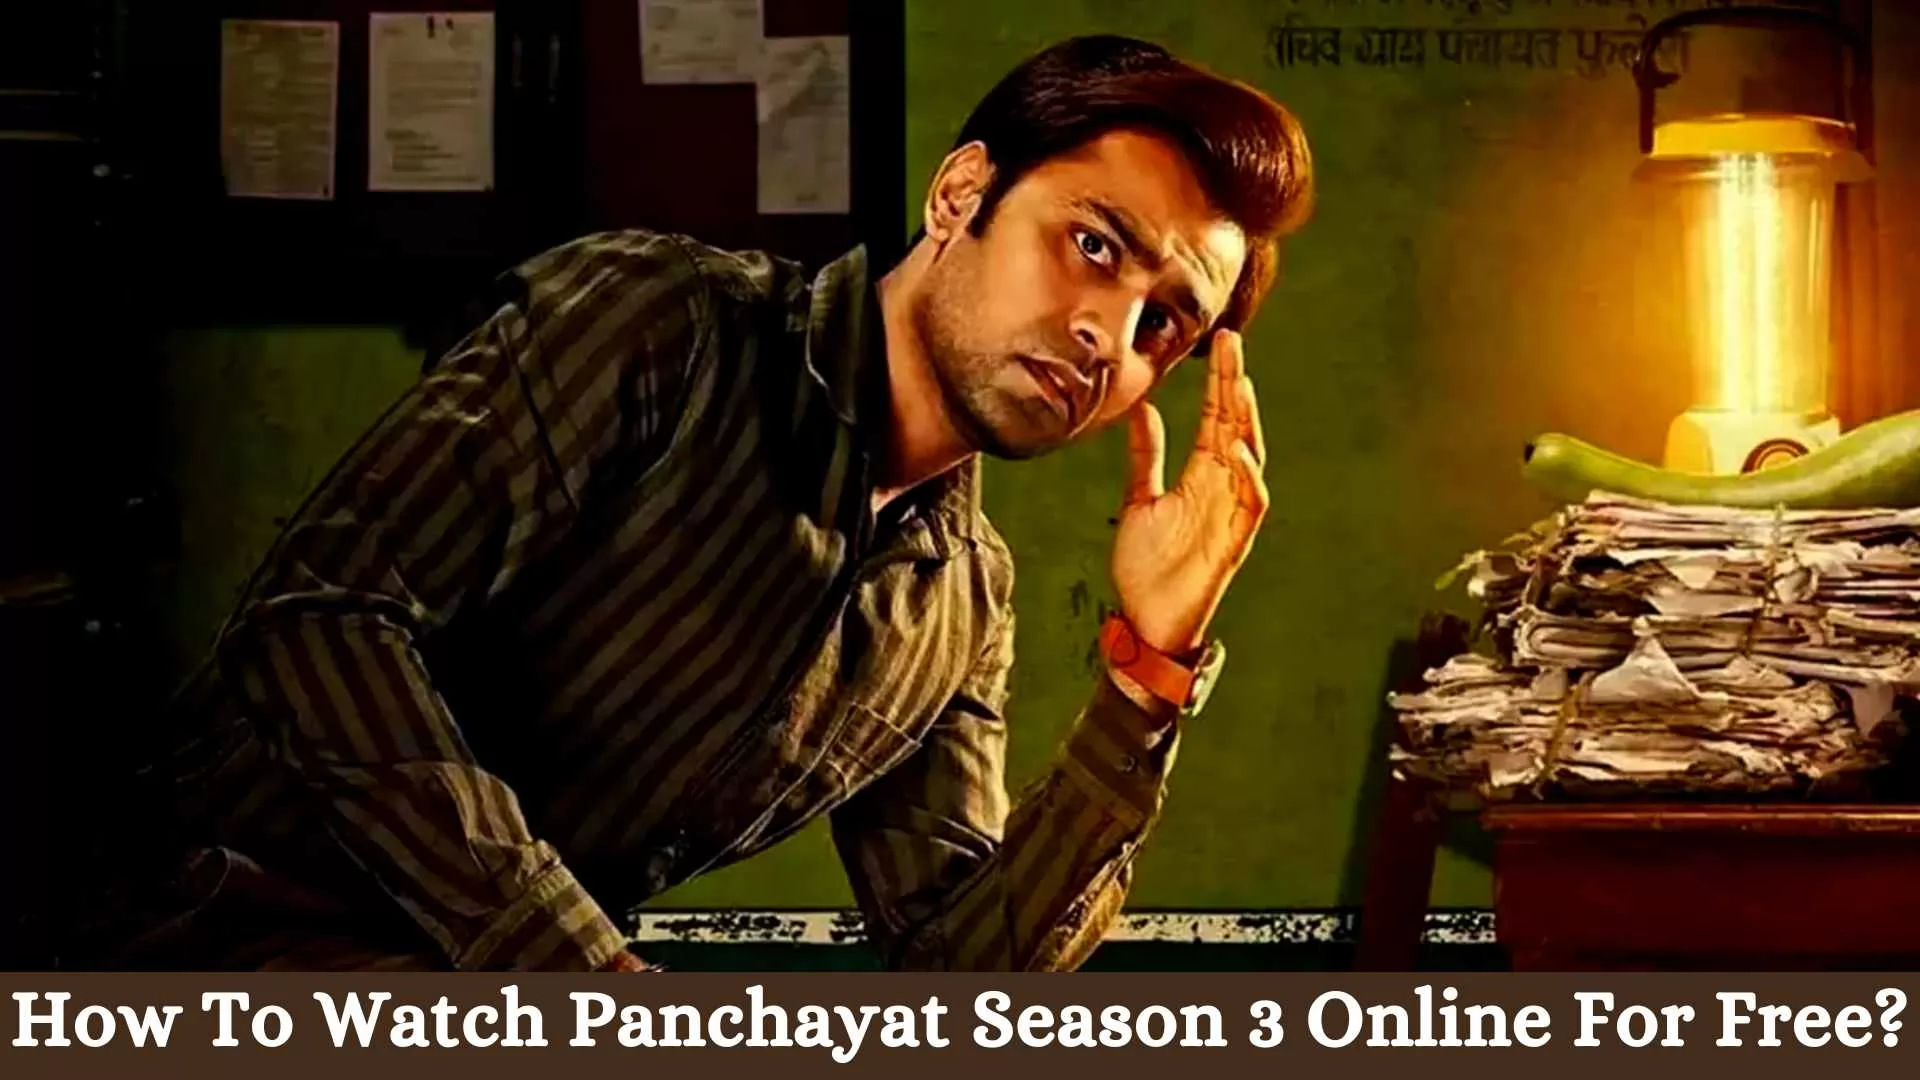  How to watch Panchayat Season 3 Online for free.